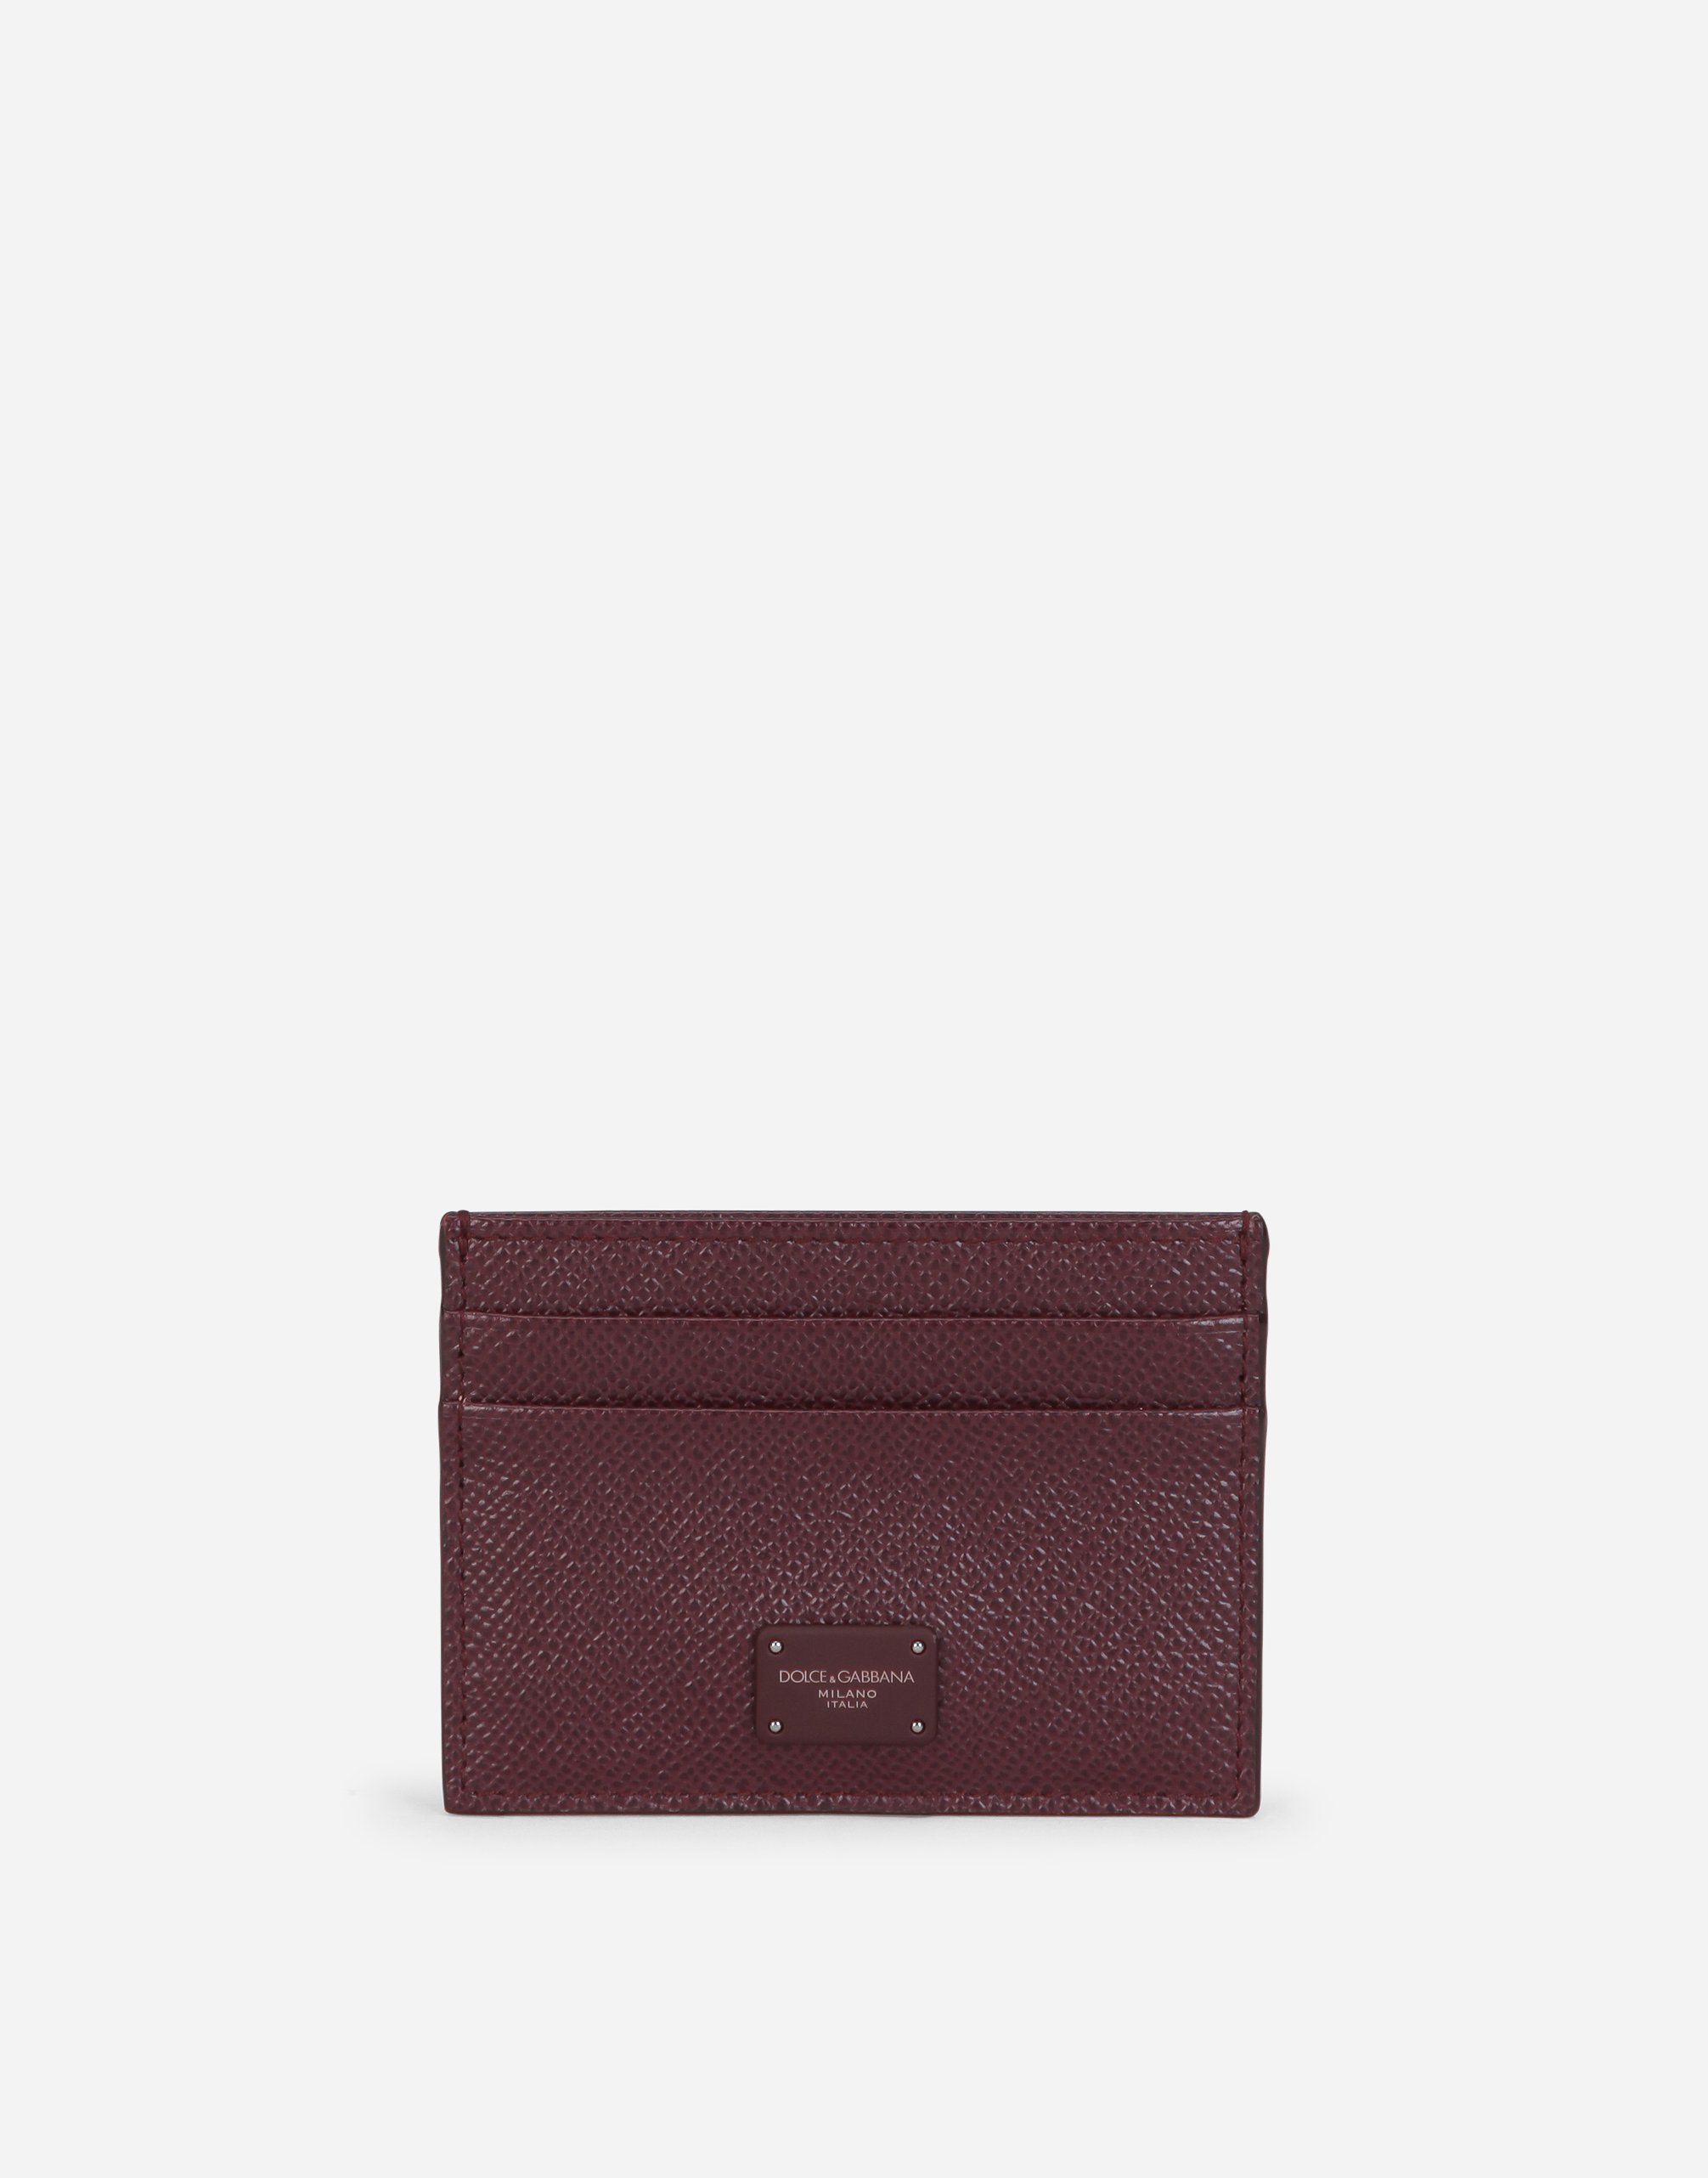 Dauphine calfskin card holder with branded plate in Bordeaux